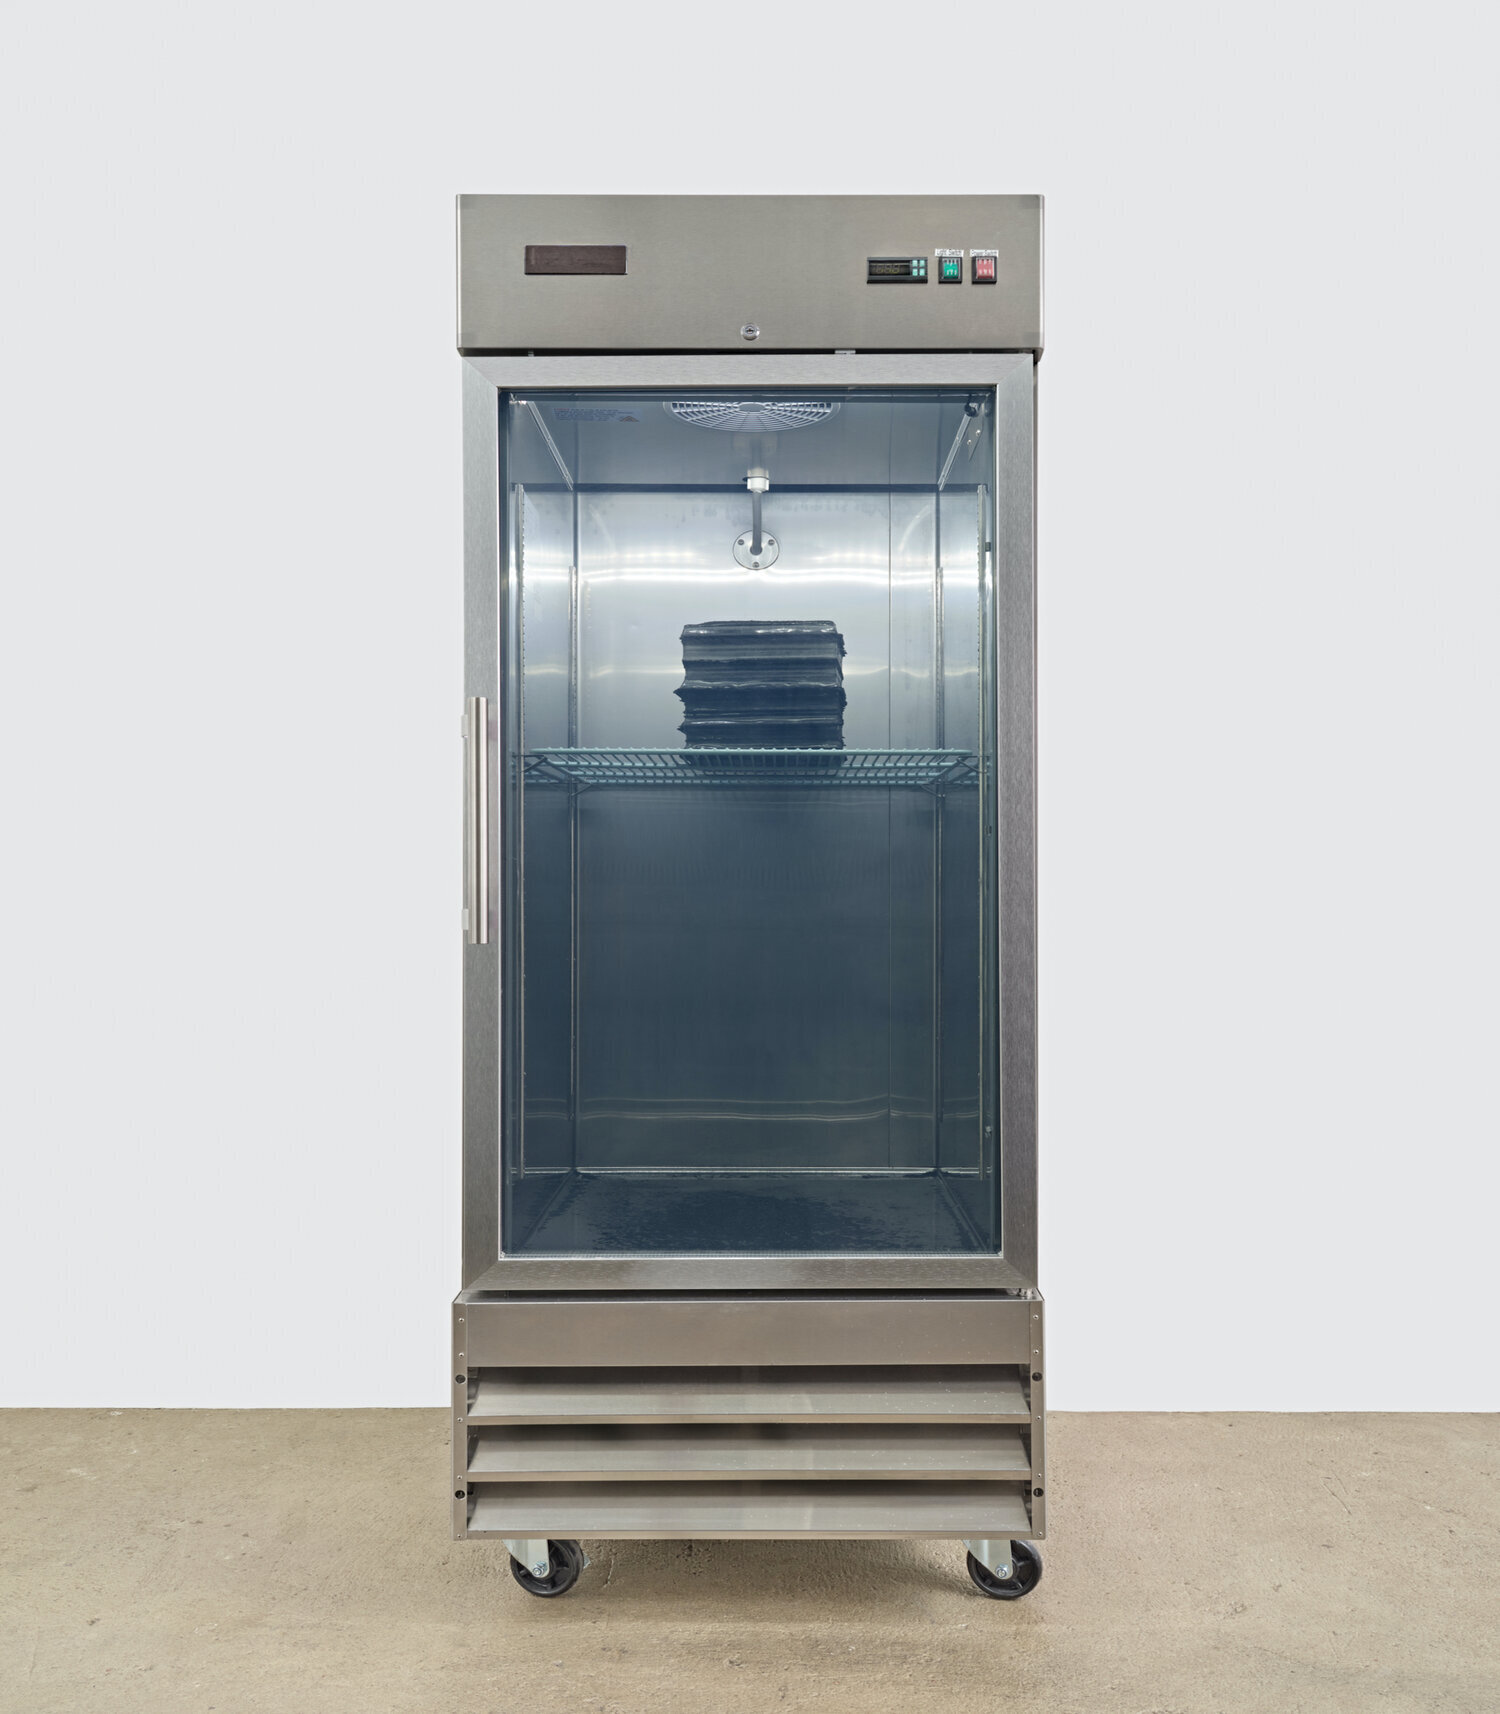 Sae Jun Kim Solicitude in stratum’s loss, 2021 commercial freezer, water, carbon sediment  82 x 29 x 34 inches (208 x 74 x 86 cm)